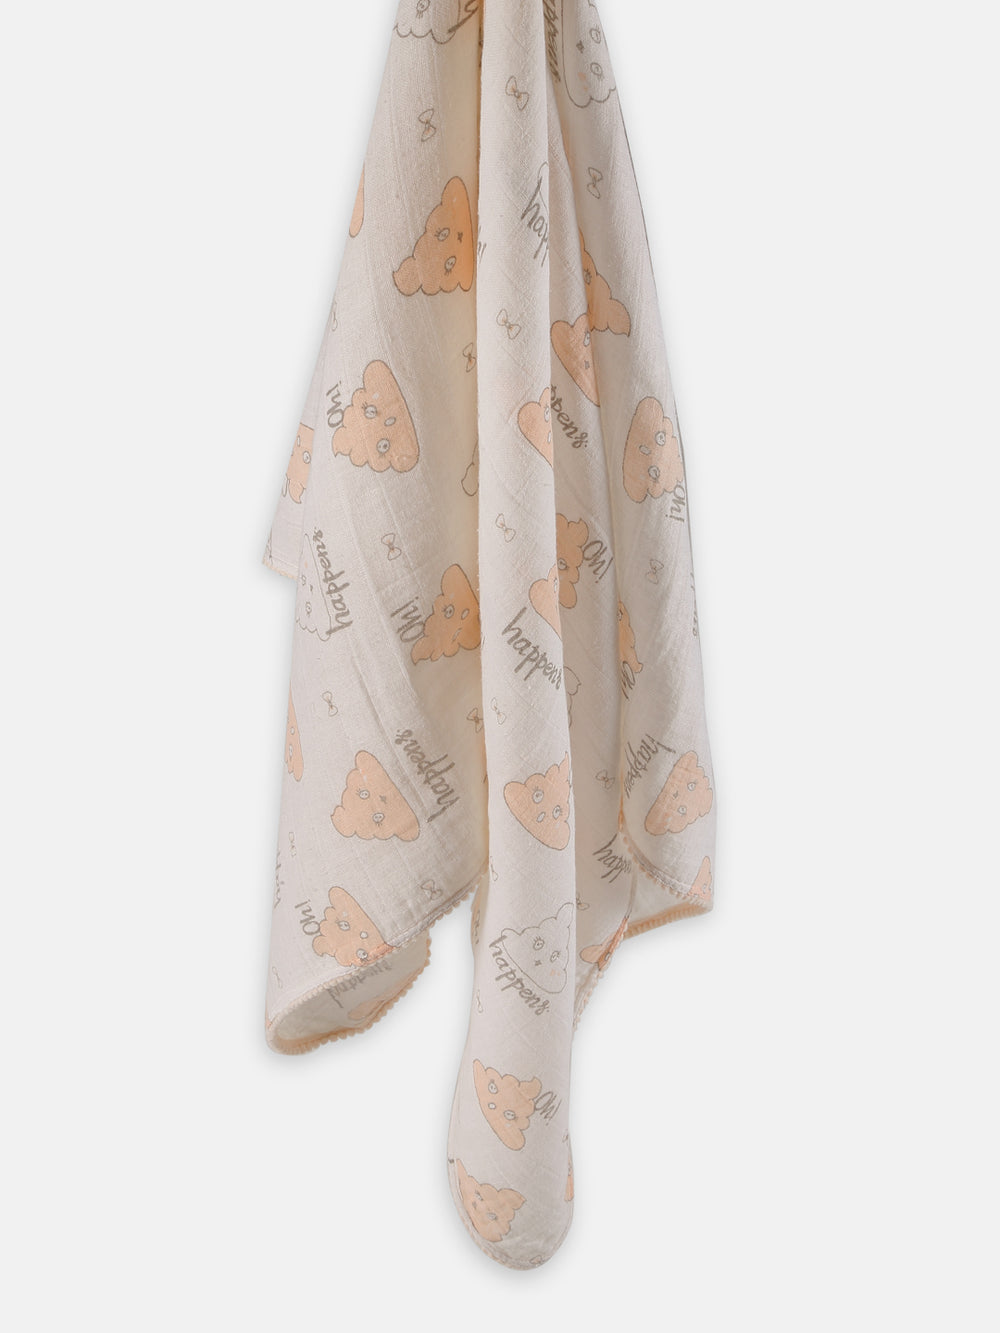 Printed Swaddle